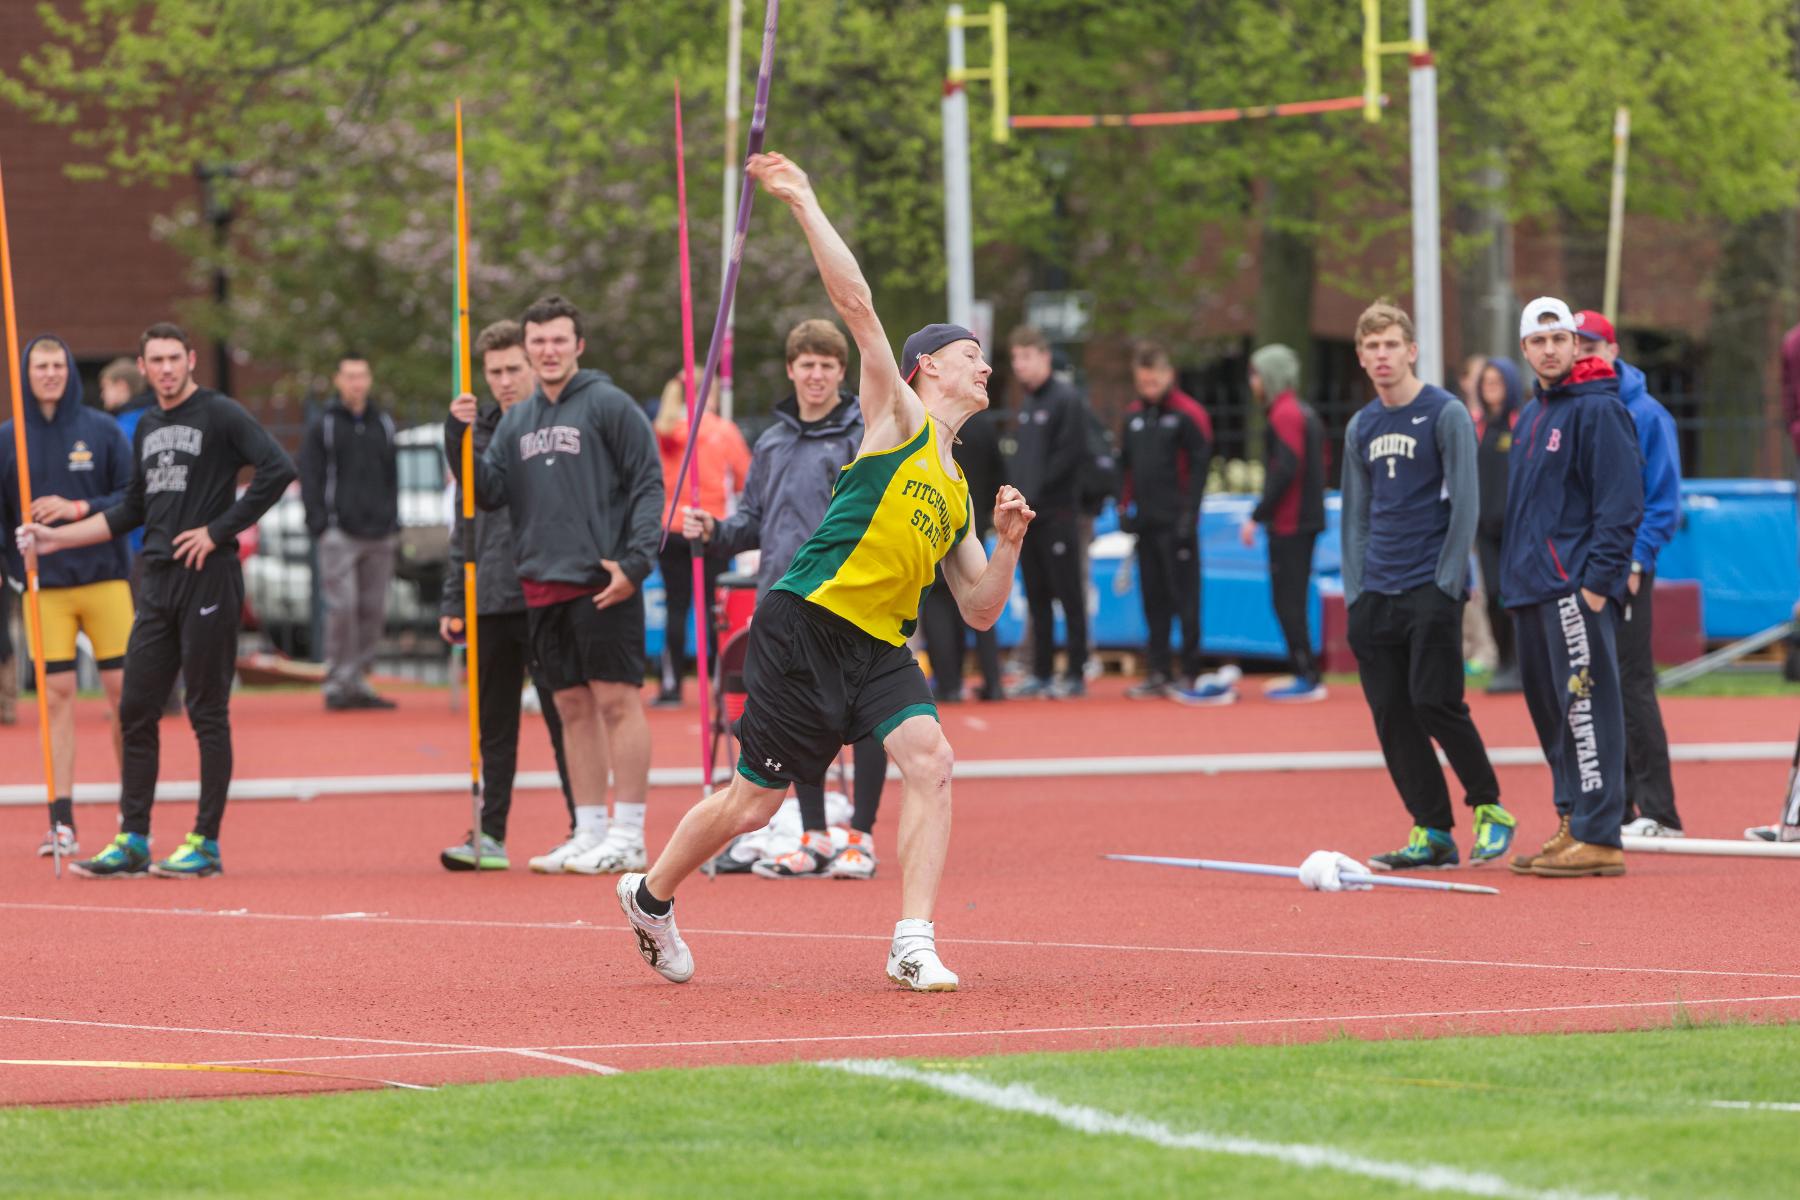 Stalters Earns MASCAC Men's Outdoor Track & Field Rookie of the Week Honors